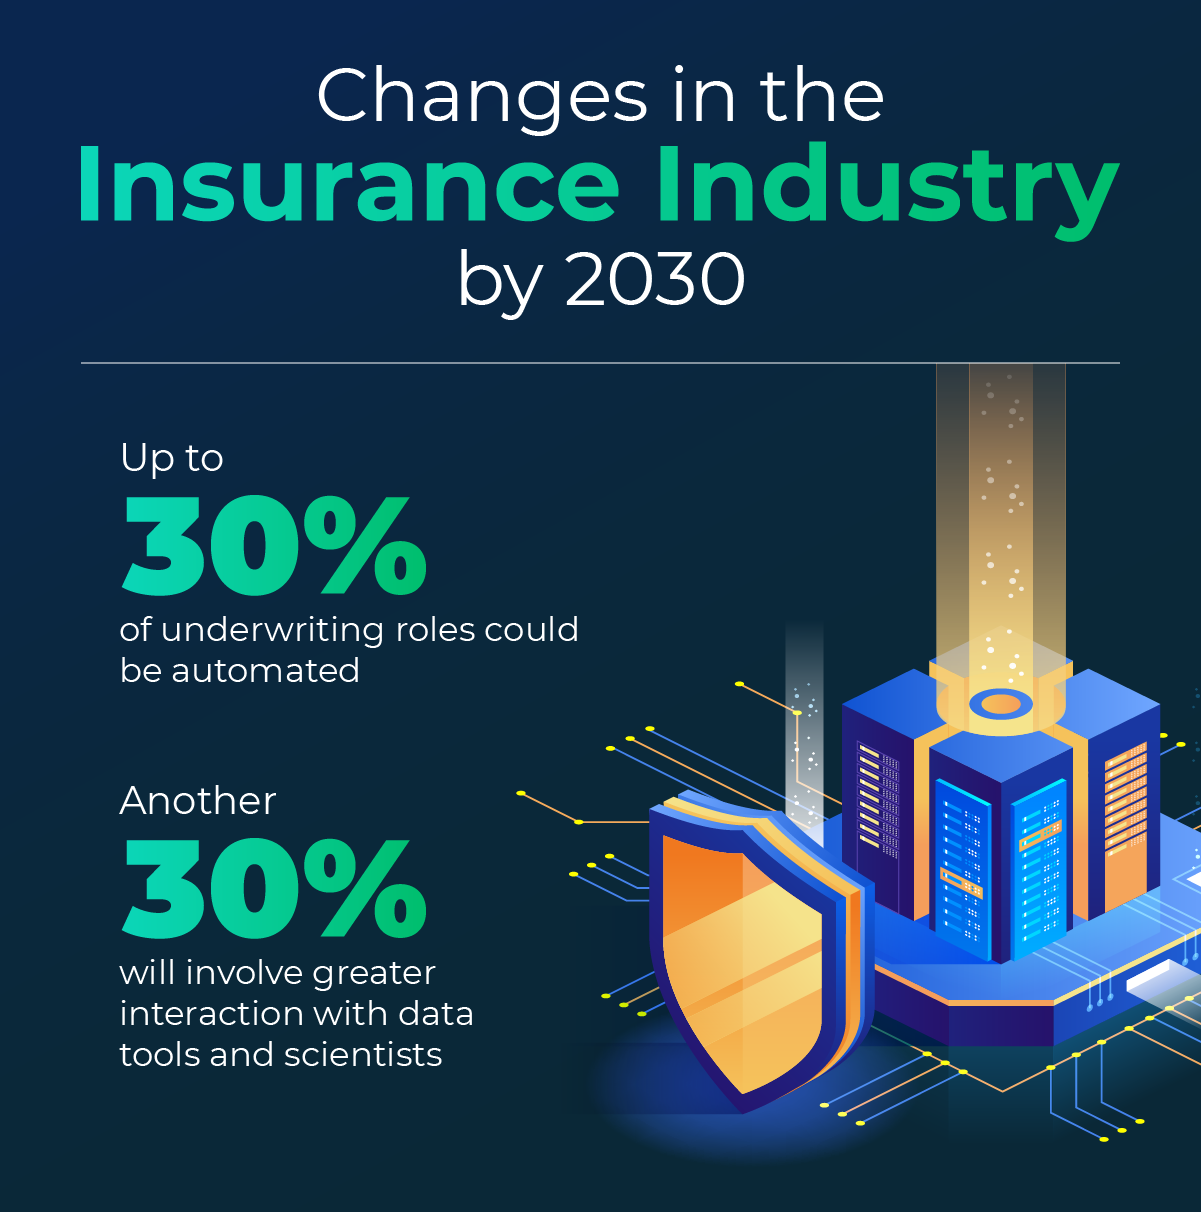 Graphic revealing 30% of underwriting roles could be automated and another 30% will involve greater use of data tools by 2030.